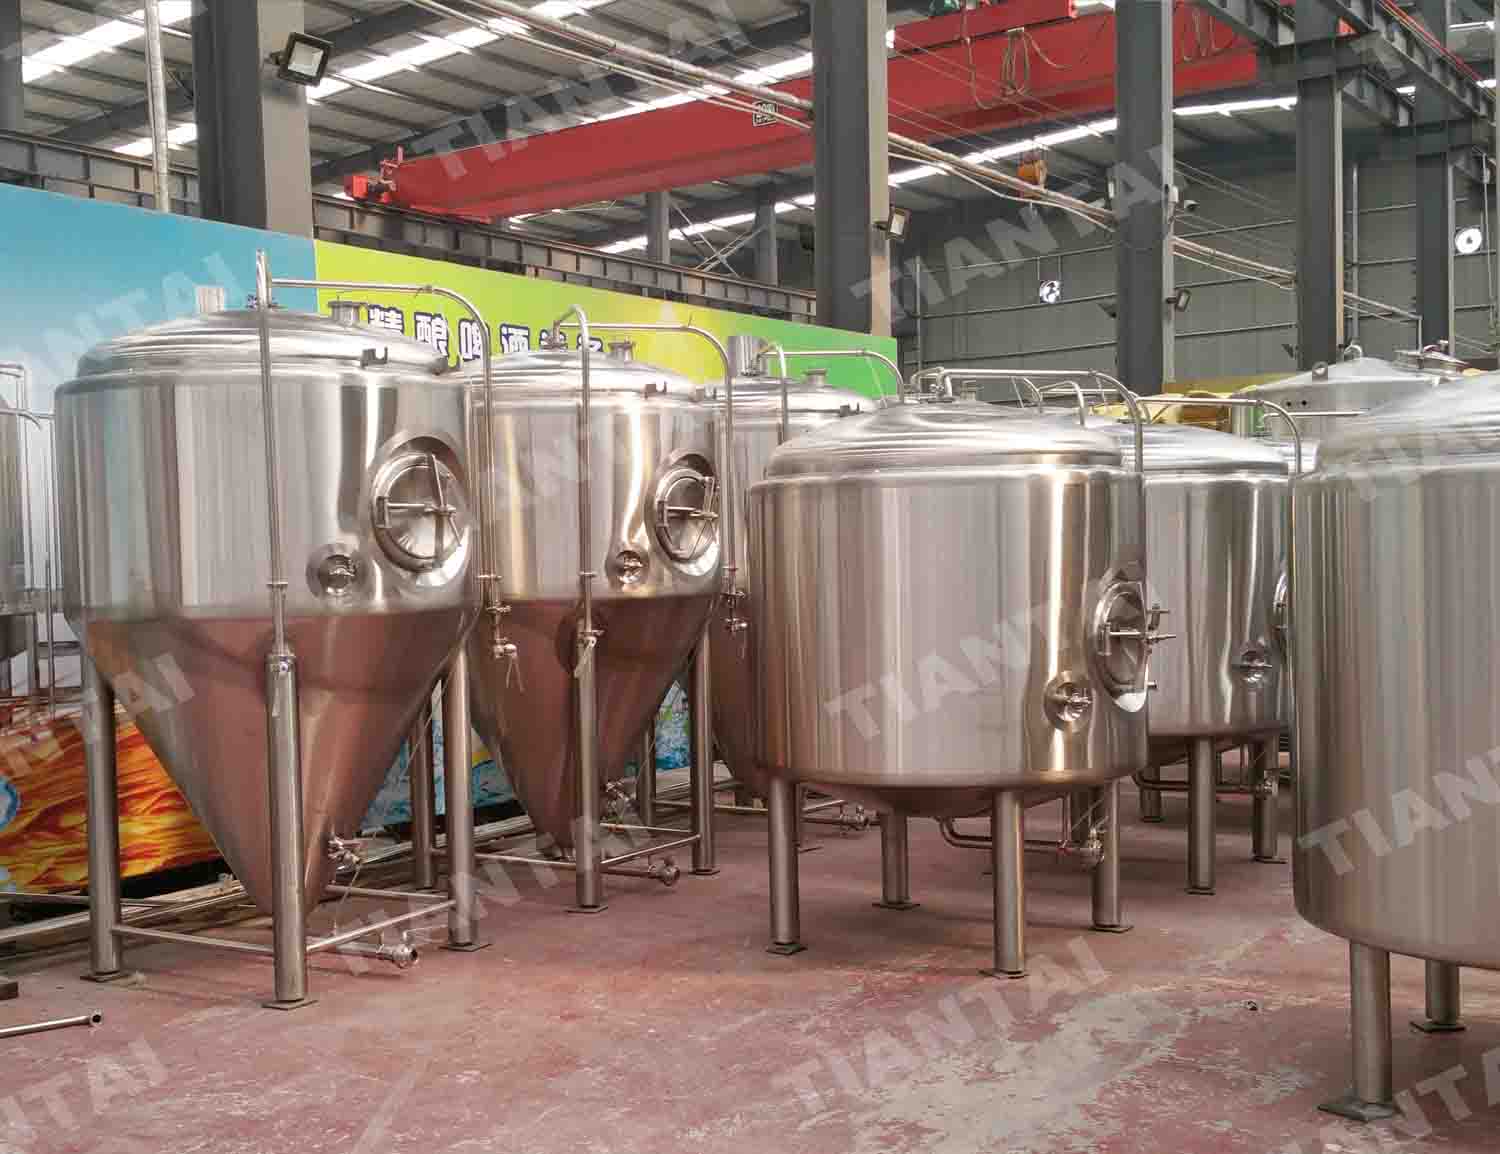 The main features of the modern conical fermentation tanks